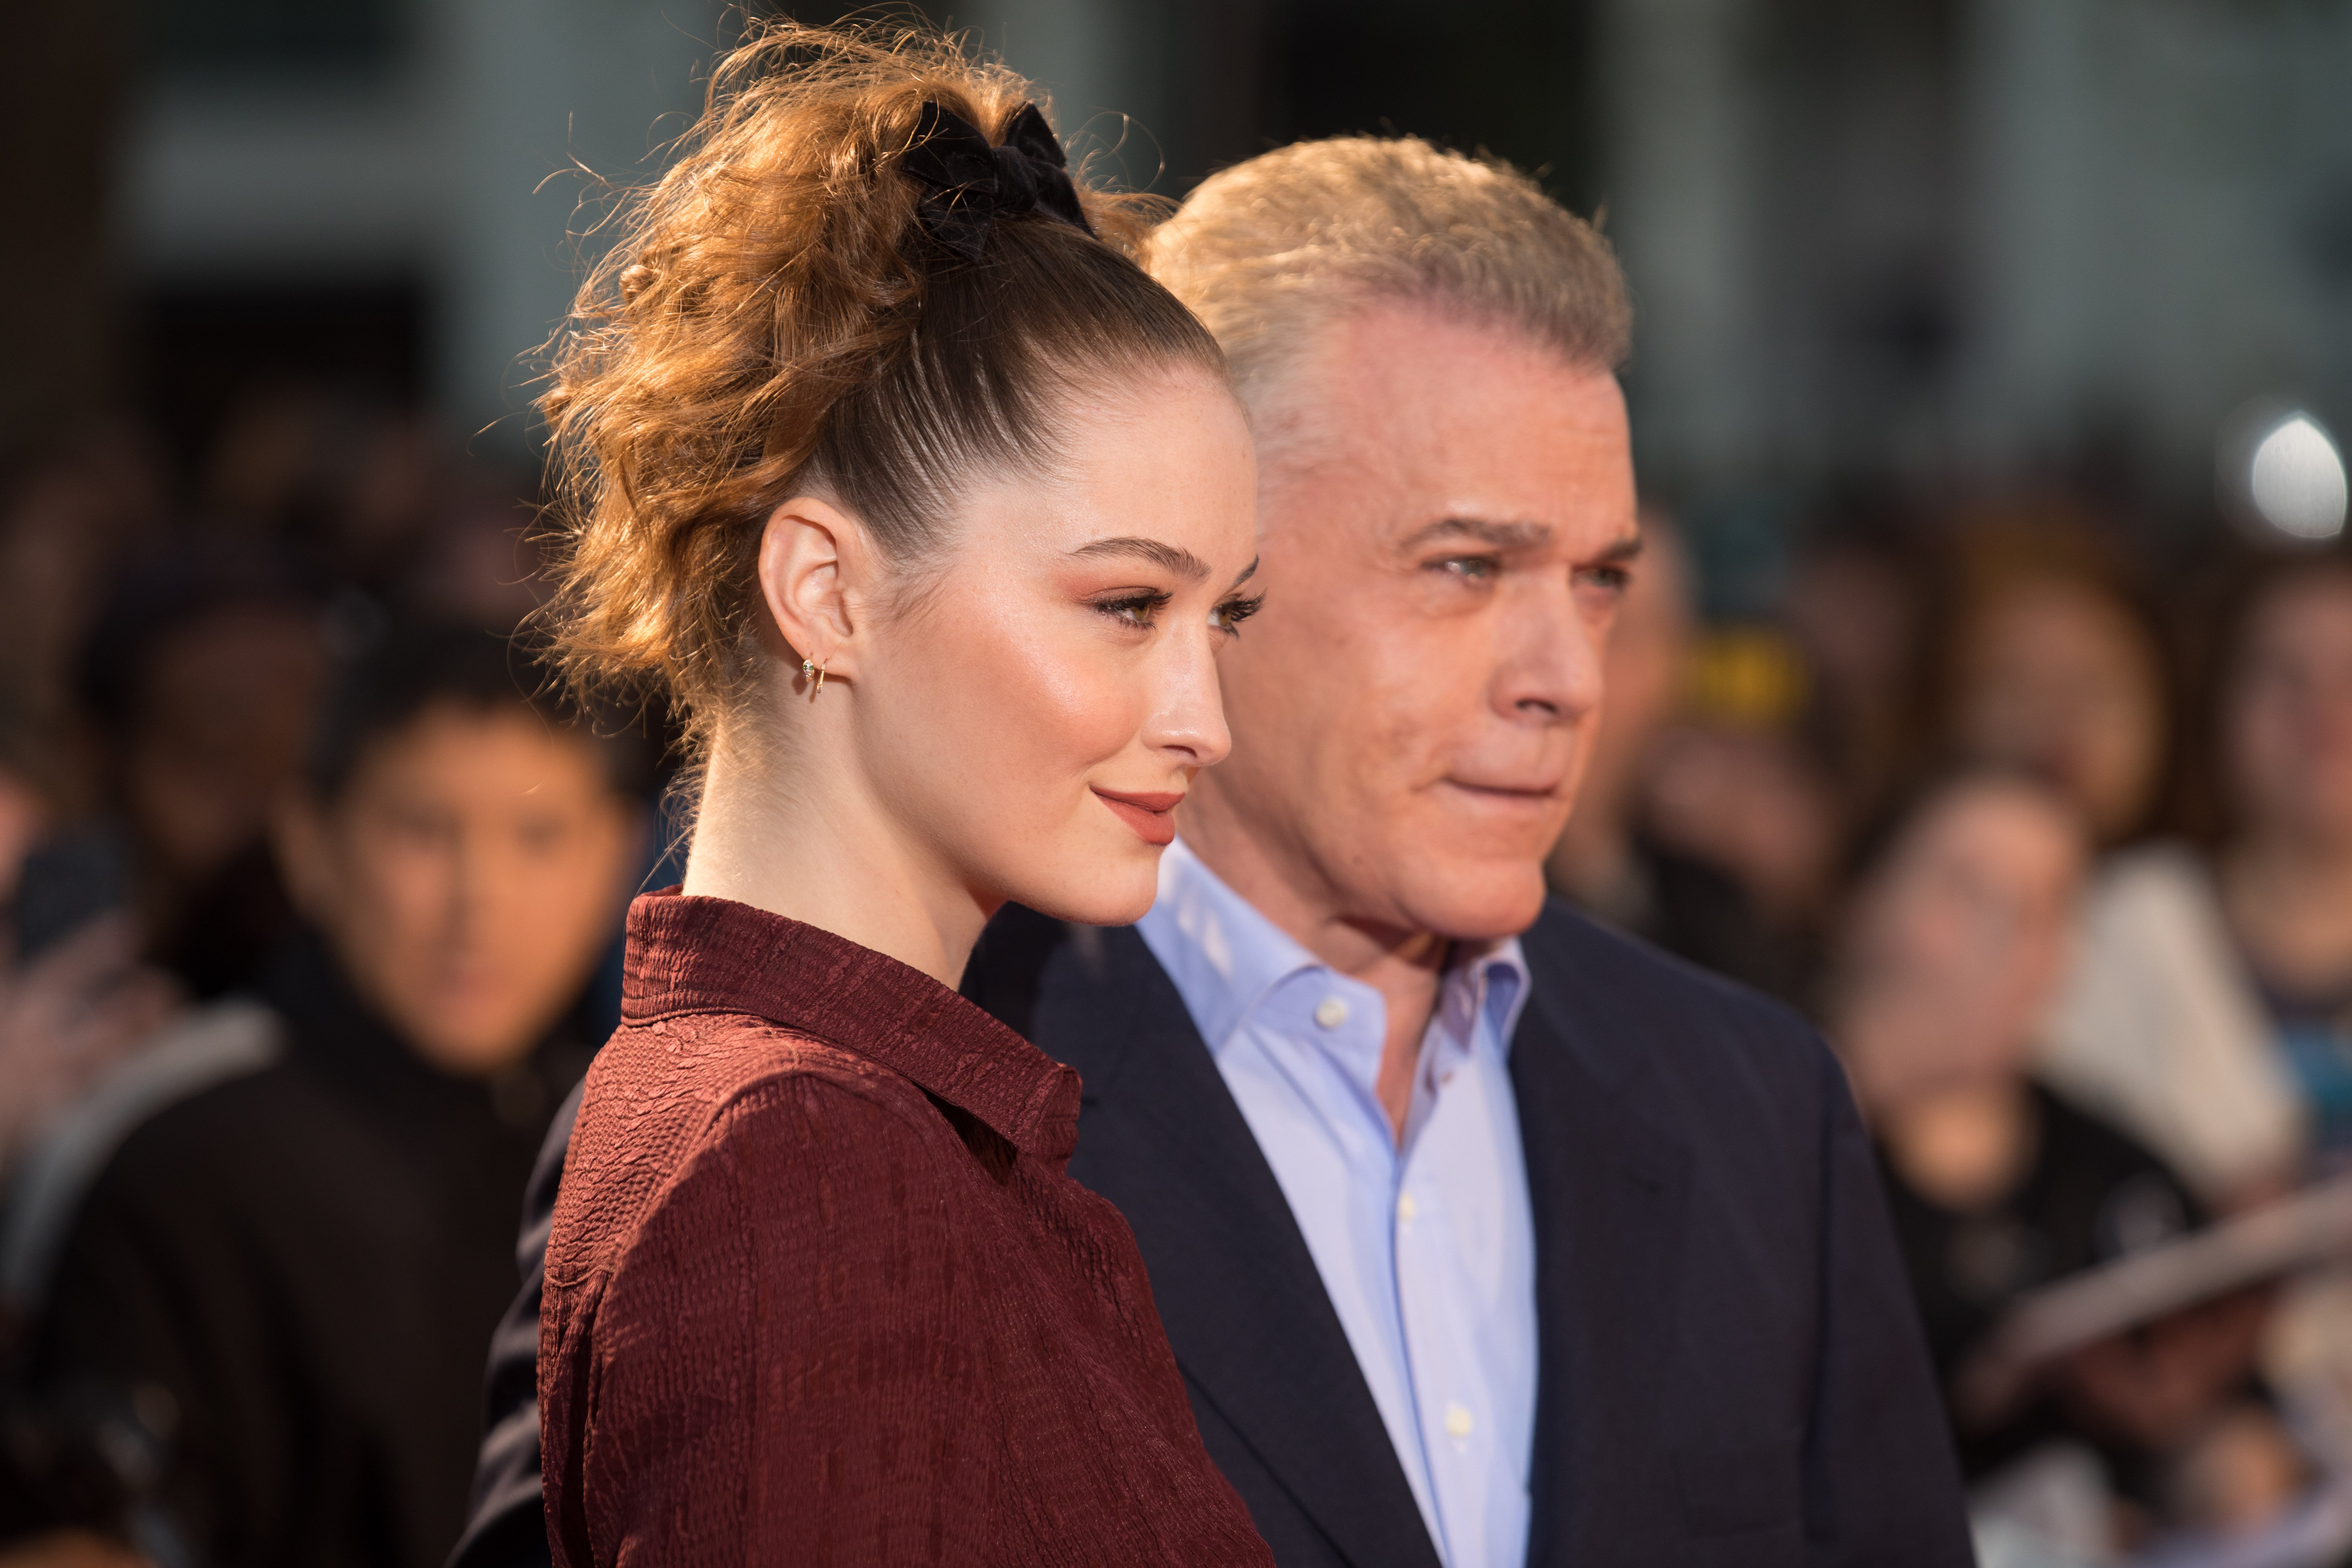 Ray Liotta and daughter Karsen attend the "Marriage Story" premiere, as part of the BFI London Film Festival, at the Odeon Leicester Square in London on October 7, 2019.  | Source: Getty Images